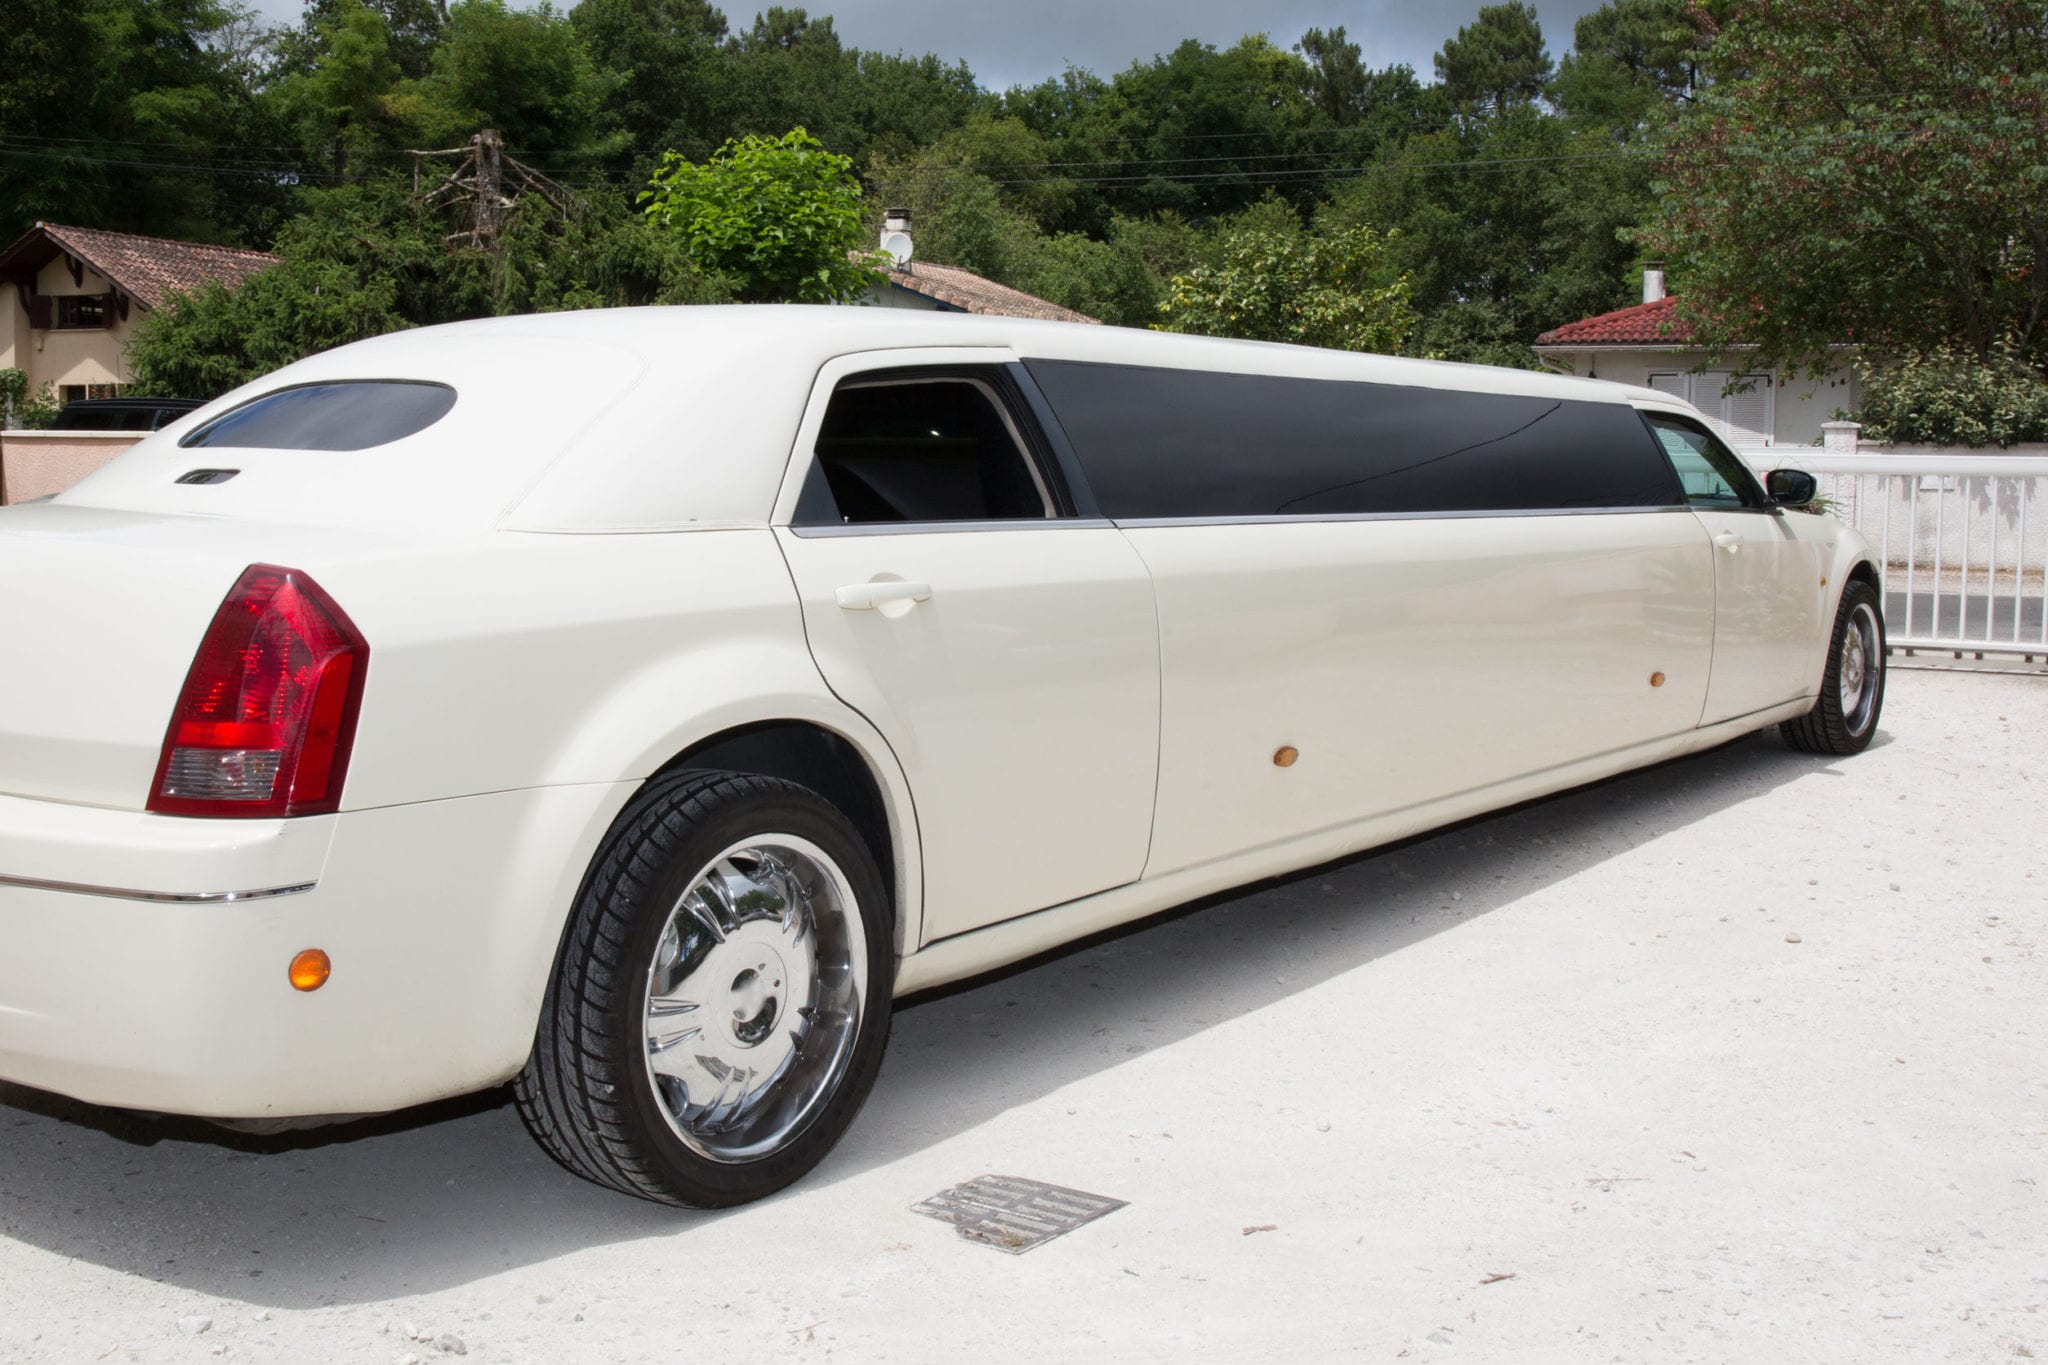 NYE Limo Wreck Your Evening? Filing a FL Injury Claim Won't Be Easy